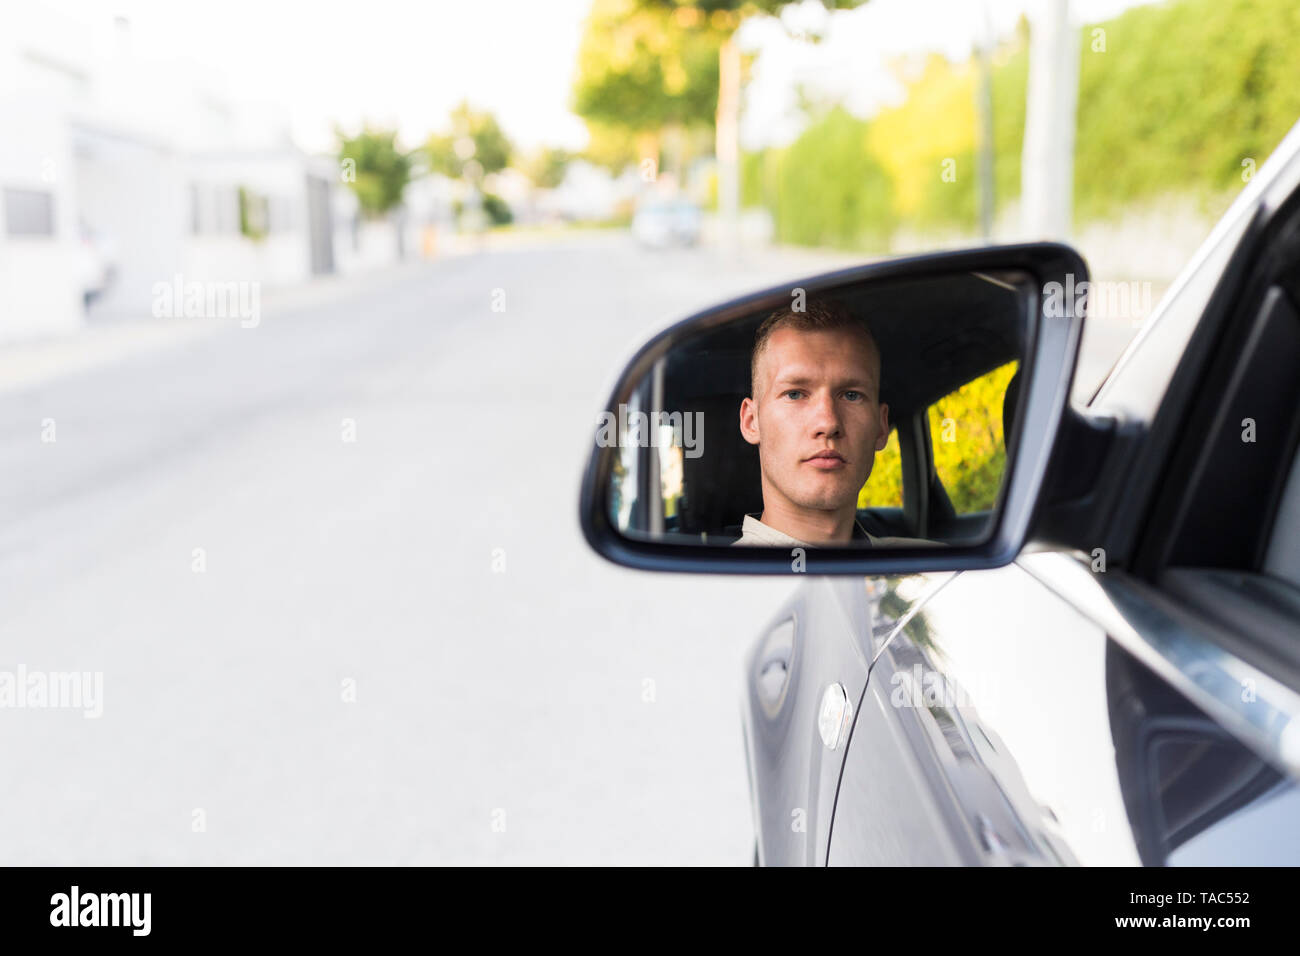 Reflection of young man in wing mirror of a car Stock Photo